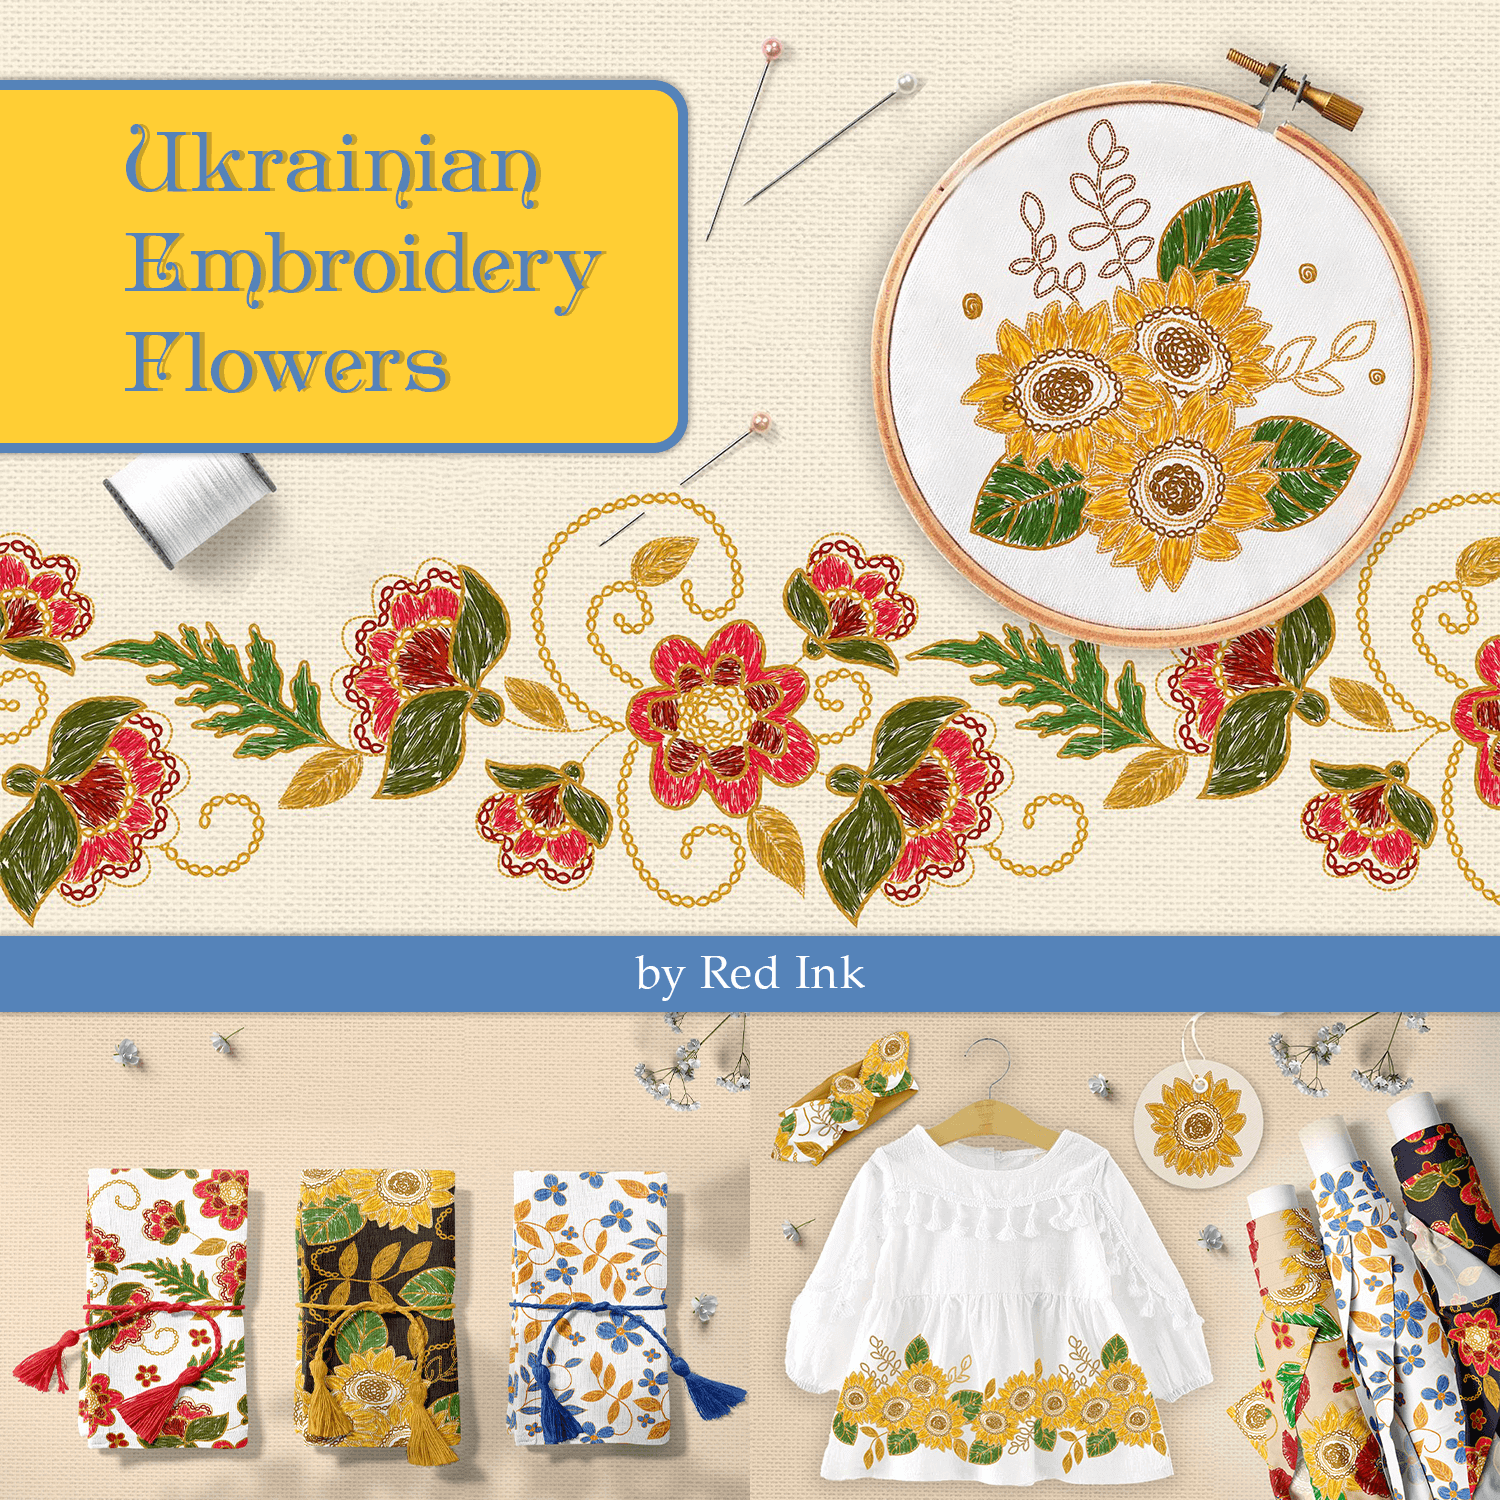 Very beautiful Ukrainian embroideries on different types of fabric.